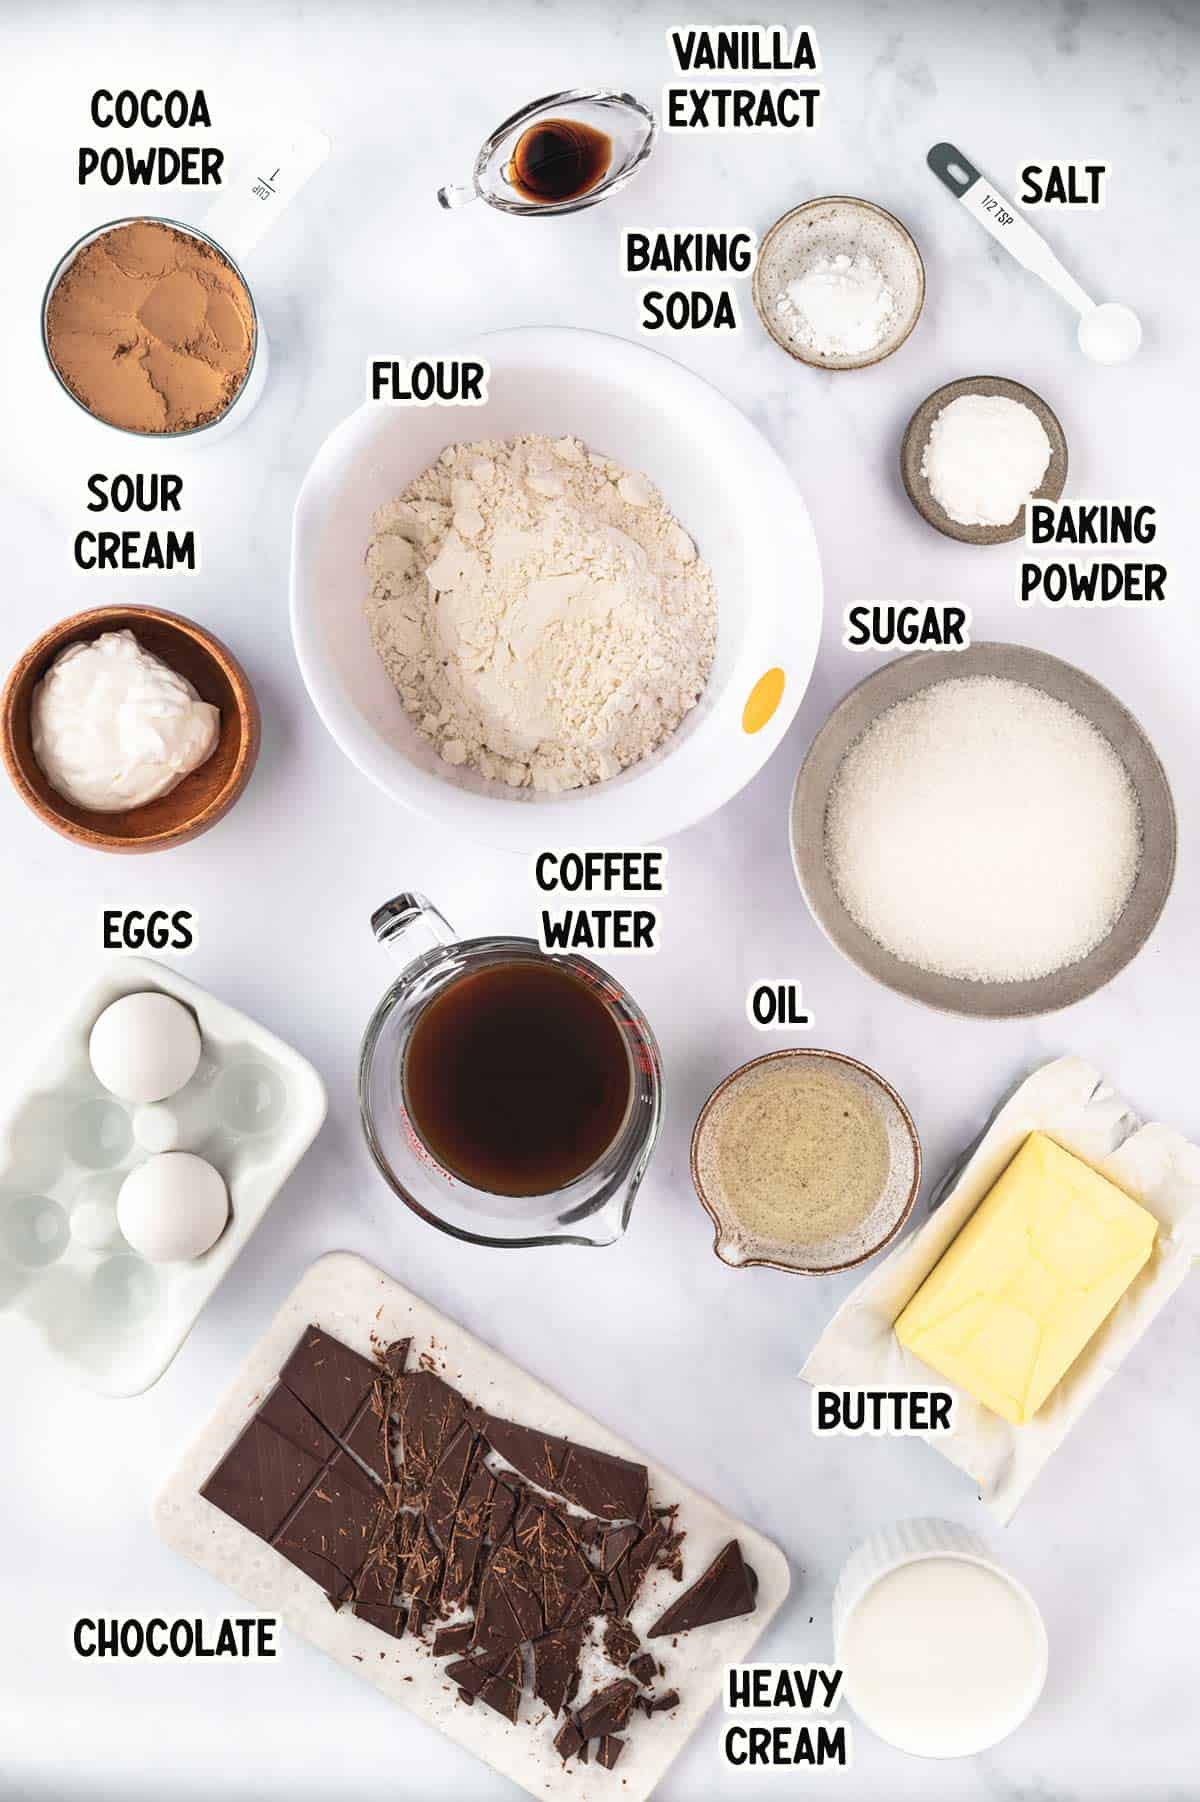 Ingredients for Chocolate Bundt cake.